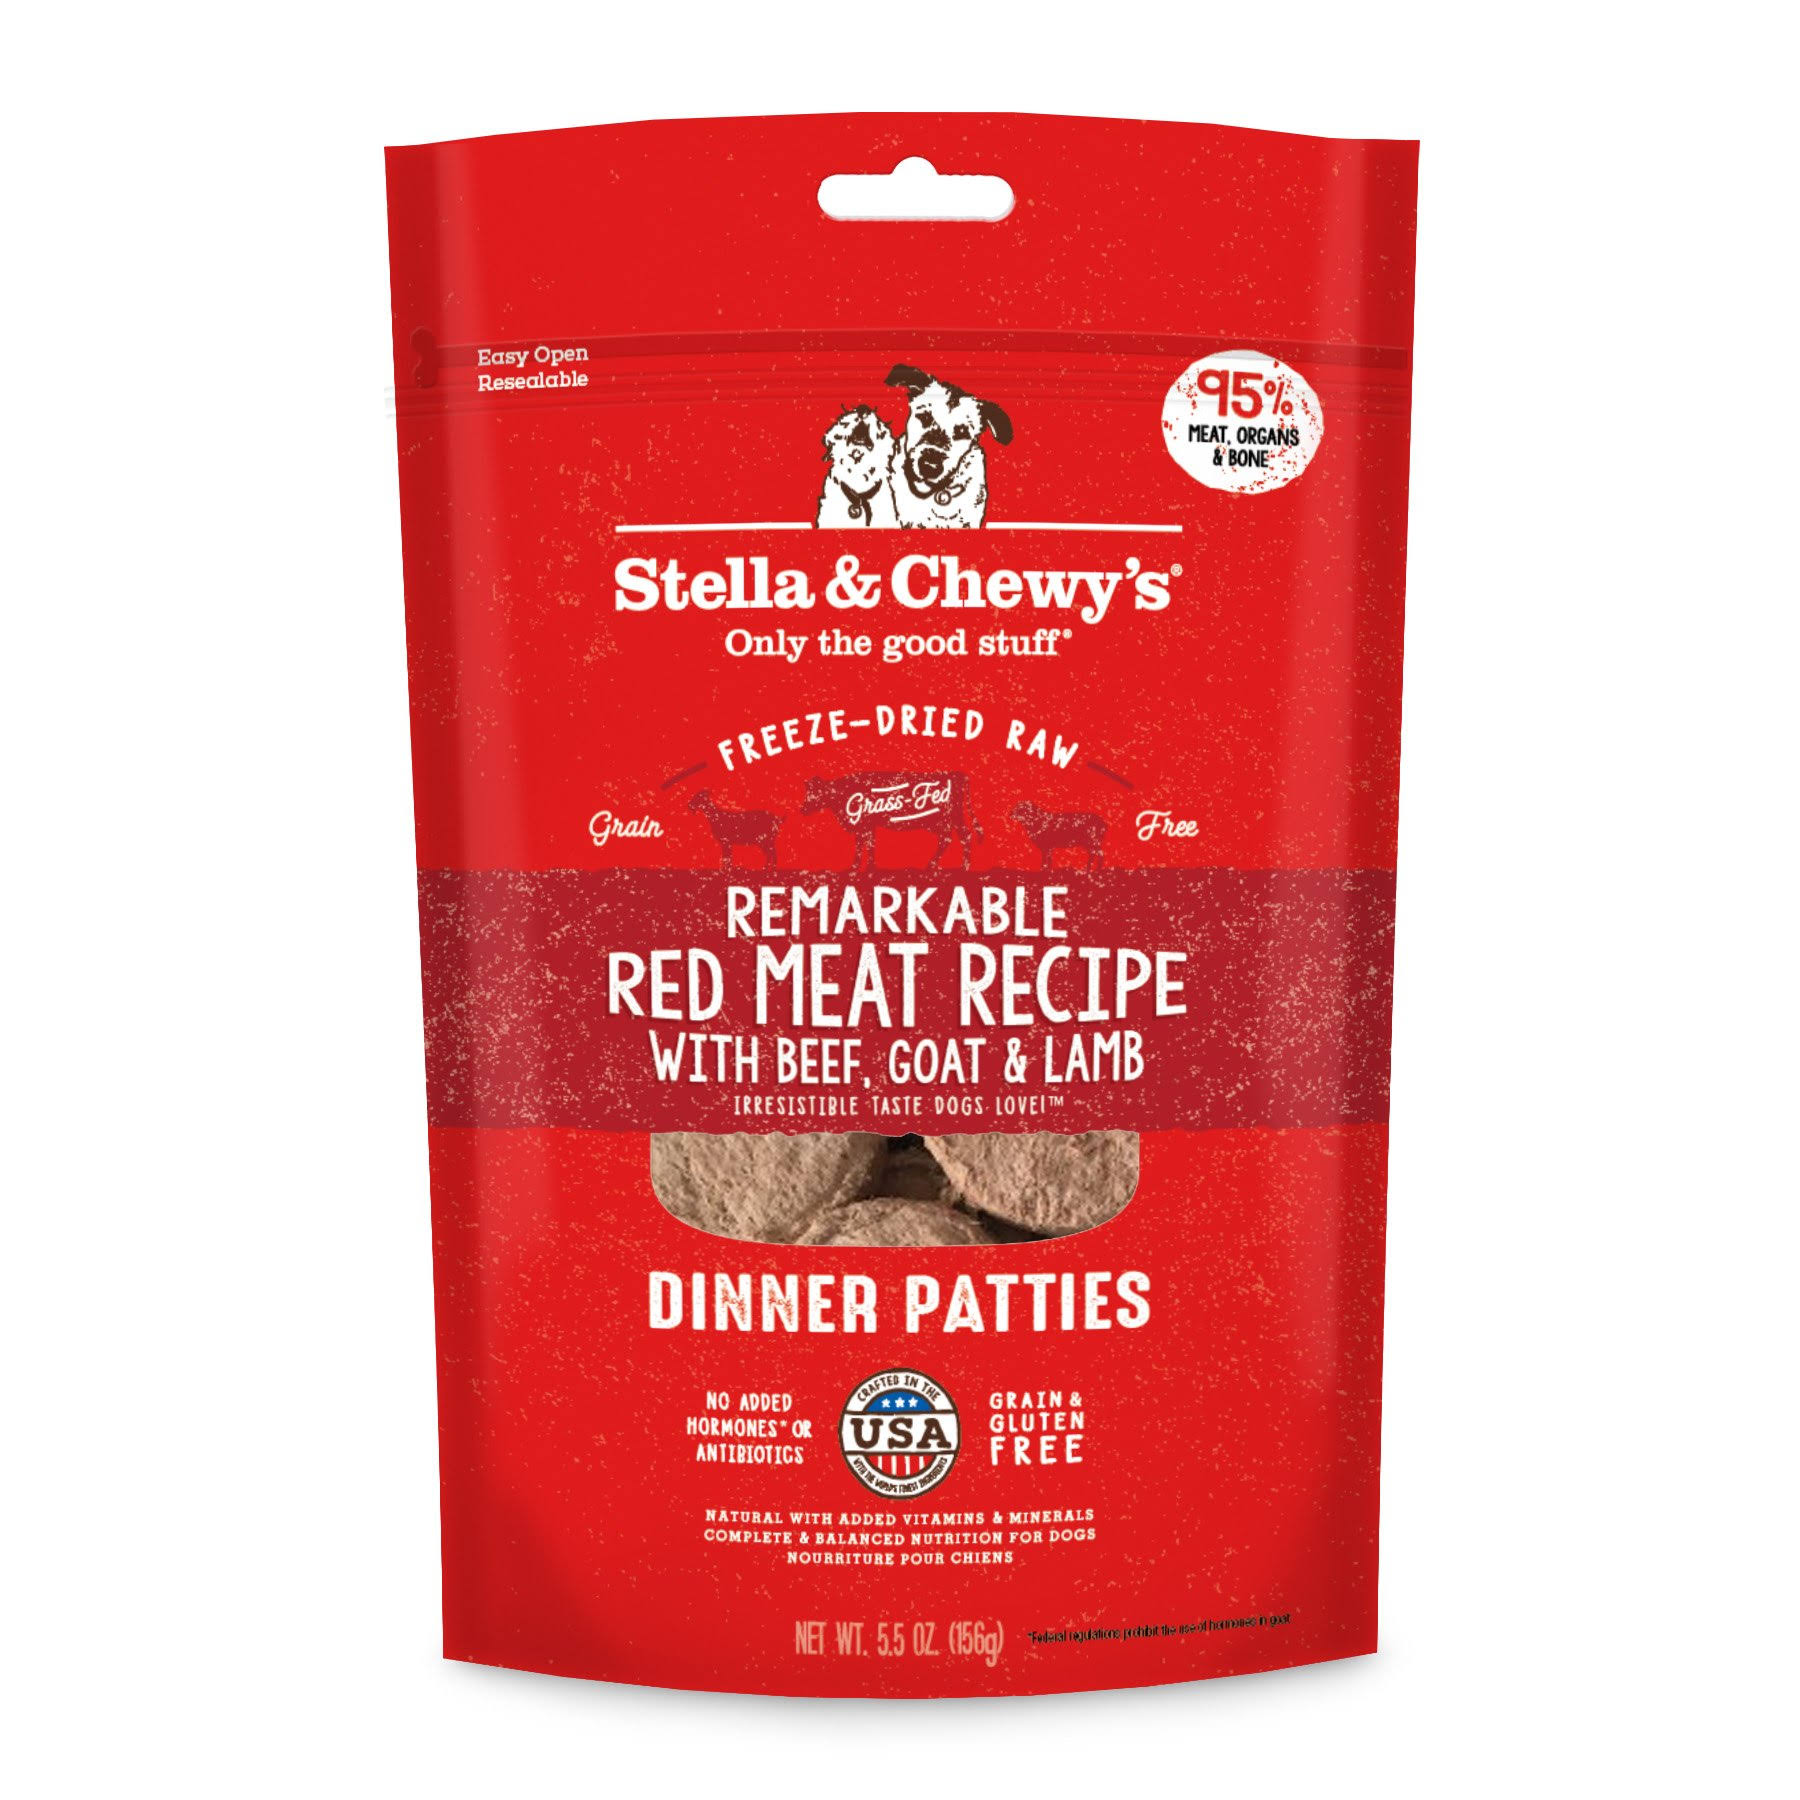 Stella & Chewy's Remarkable Red Meat Recipe Dinner Patties Dog Treats - Freeze Dried - 5.5 oz.